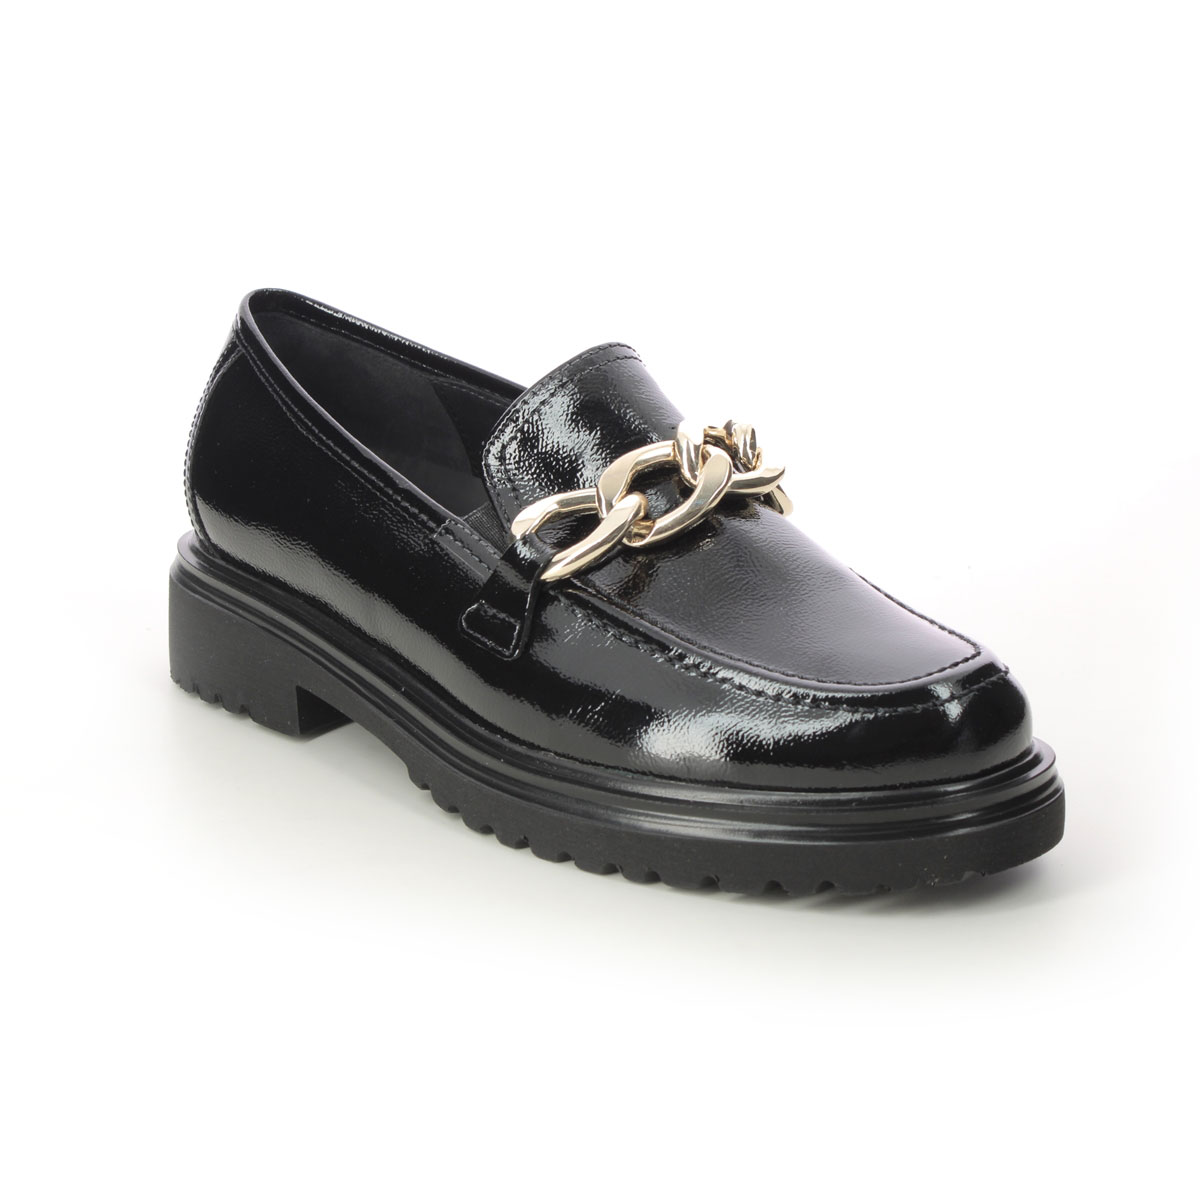 Gabor Florida H Black Patent Womens Loafers 92.554.97 In Size 5.5 In Plain Black Patent  Womens Comfort Slip On Shoes In Soft Black Patent Leather